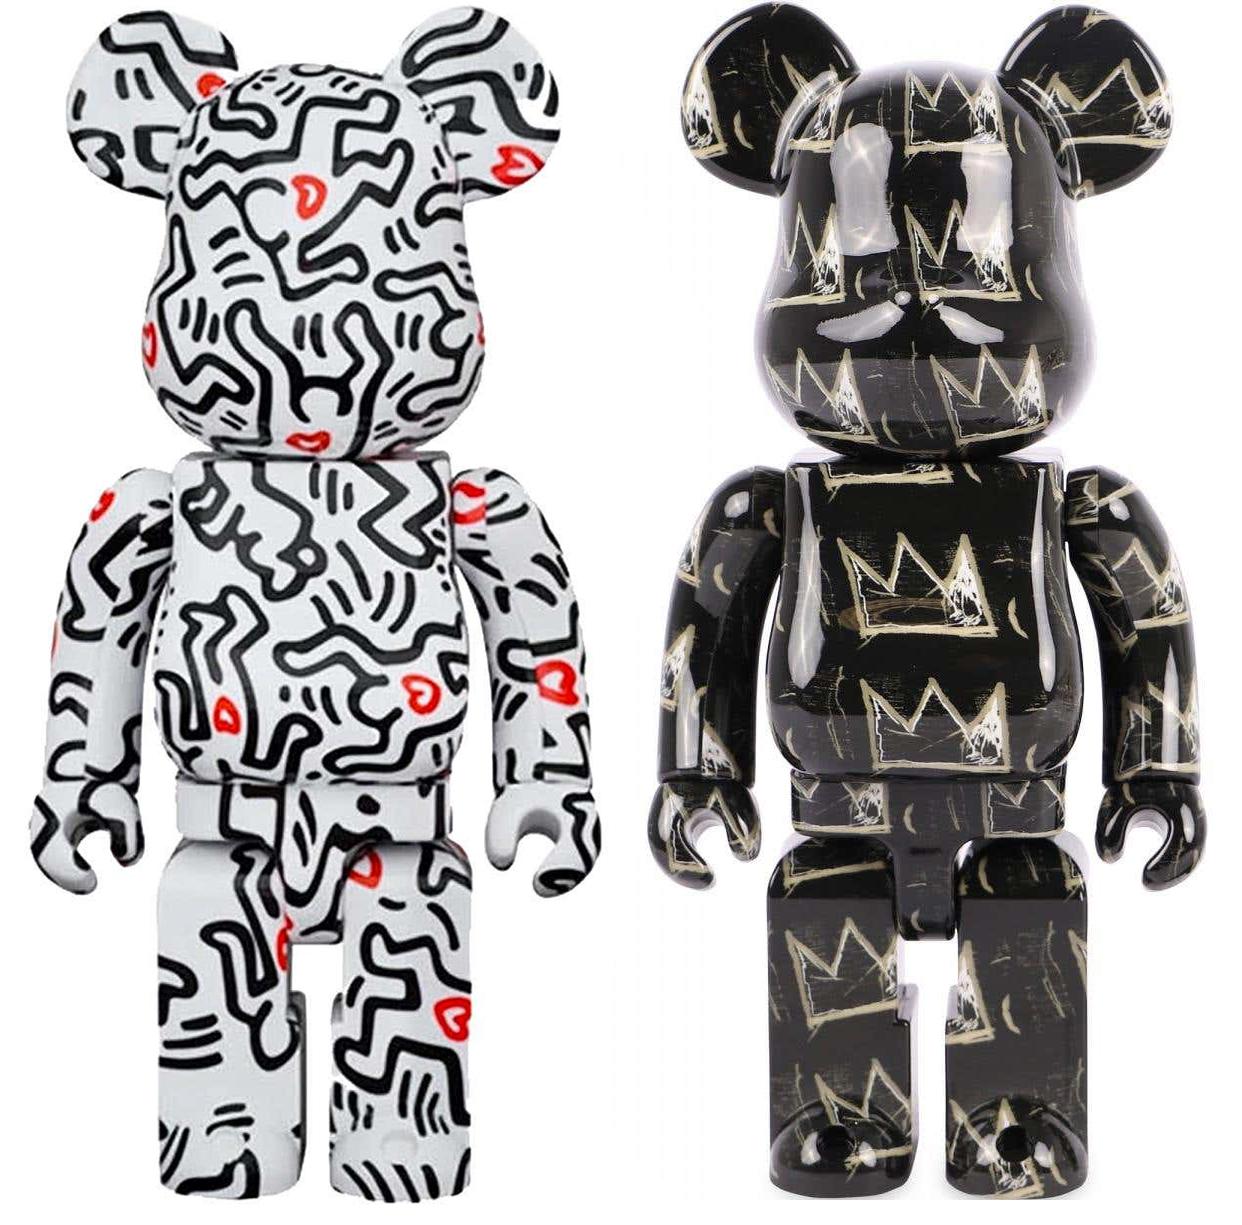 Basquiat Keith Haring 400% Bearbrick set (Basquiat Haring BE@RBRICK) - Print by after Jean-Michel Basquiat